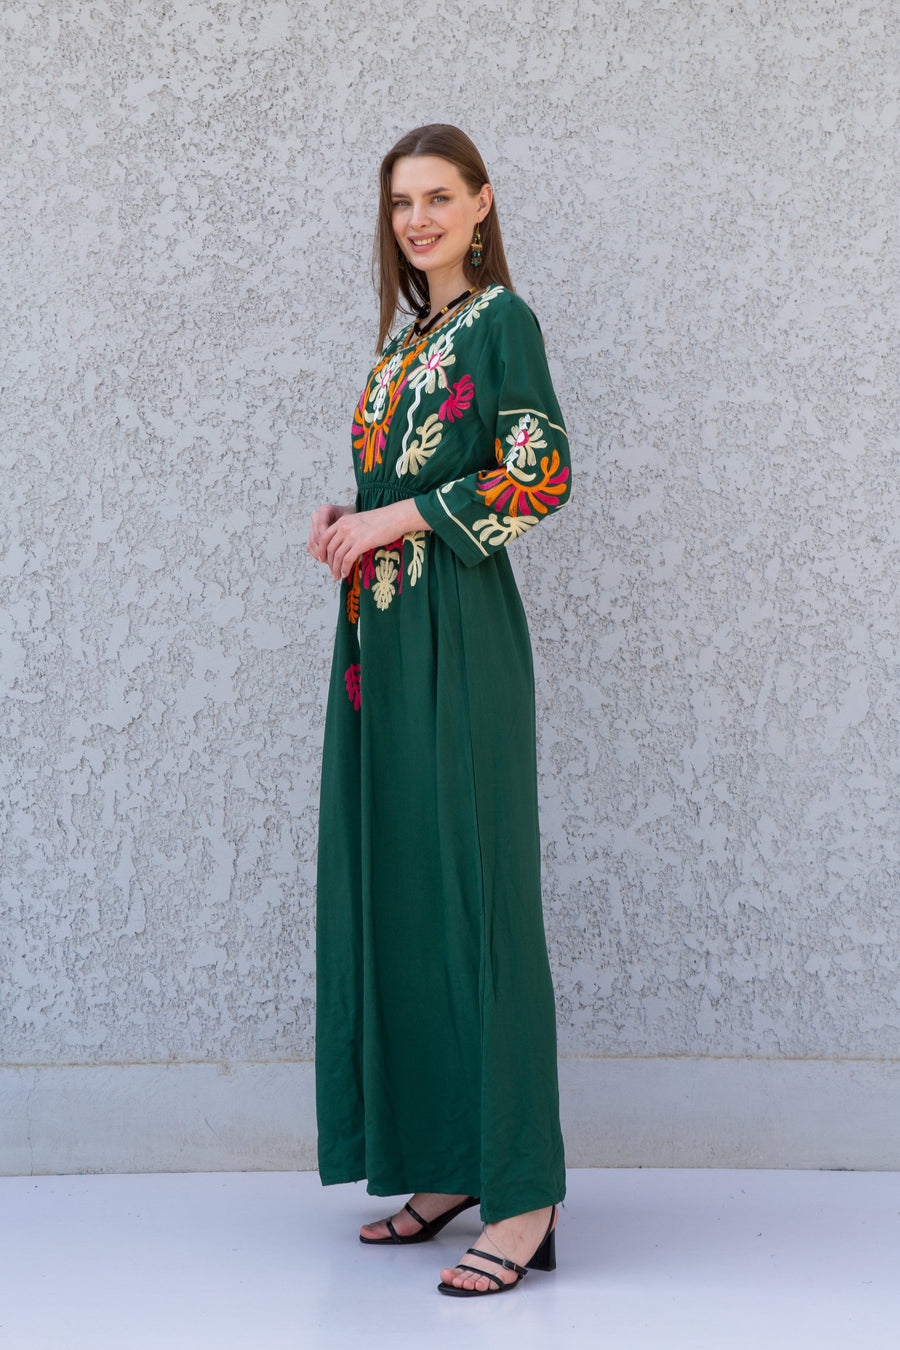 Greeh colorful embroidered cotton Caftan, caftan Kaftan maxi dress, embroidered Caftan dress, Caftan maxi dress, Caftans for women, Caftans